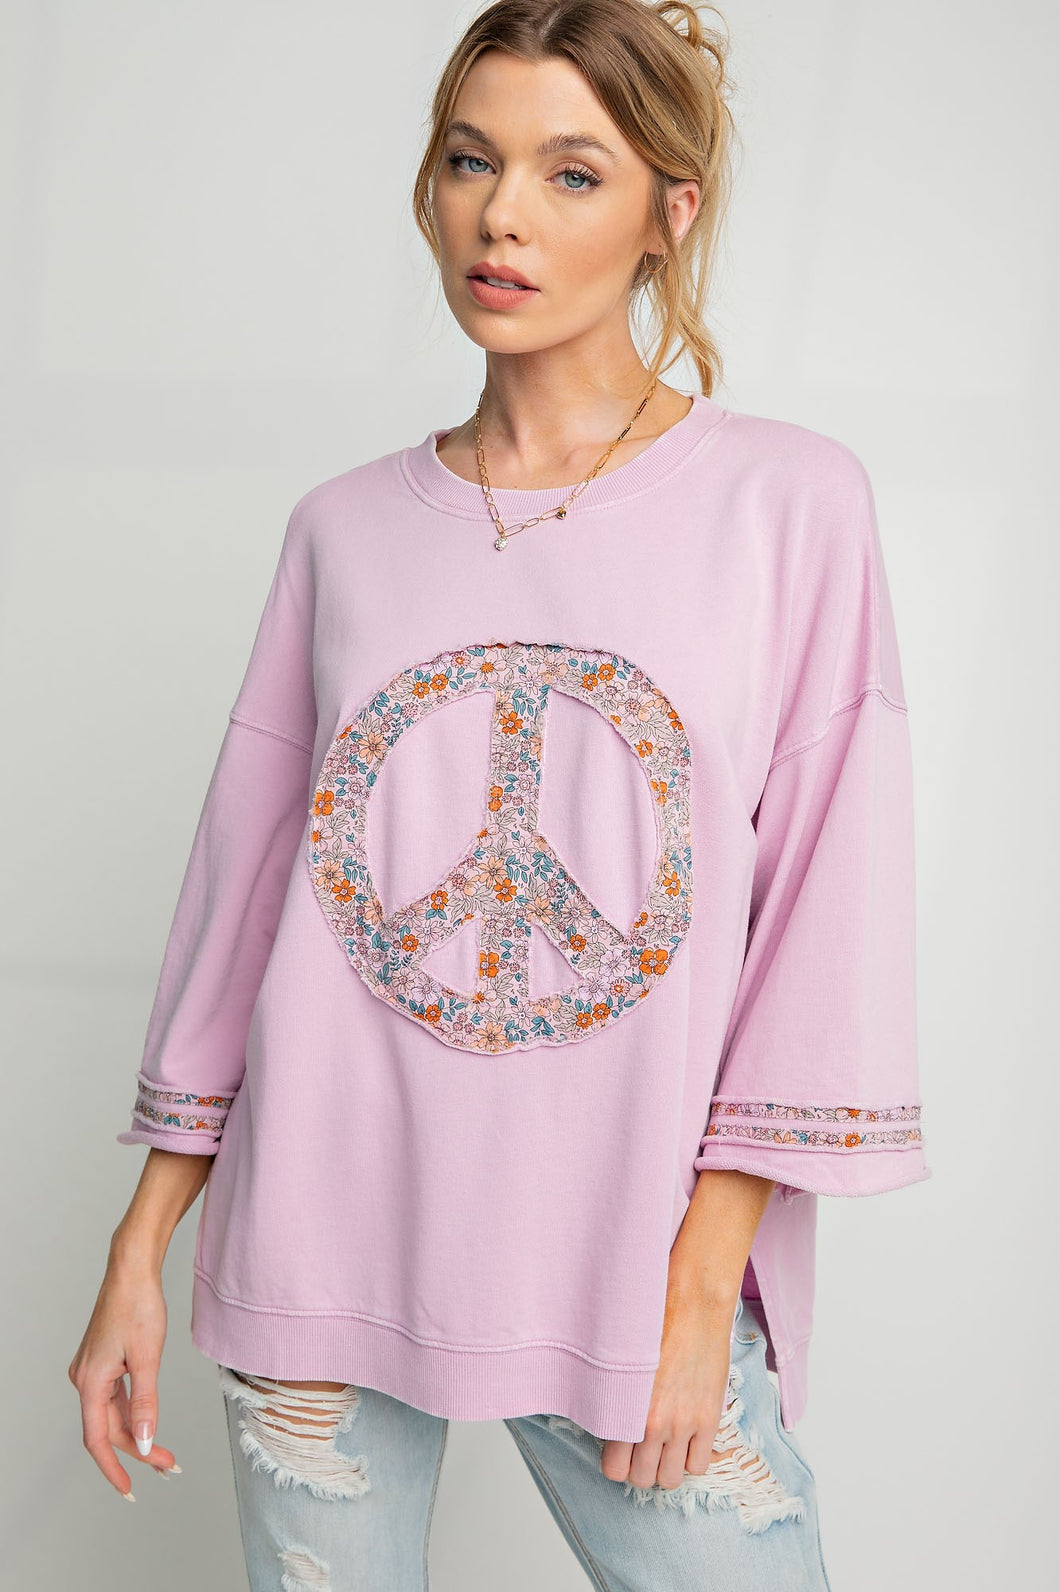 Easel Floral Peace Sign Pullover in Cotton Candy ON ORDER ESTIMATED ARRIVAL LATE OCTOBER Shirts & Tops Easel   